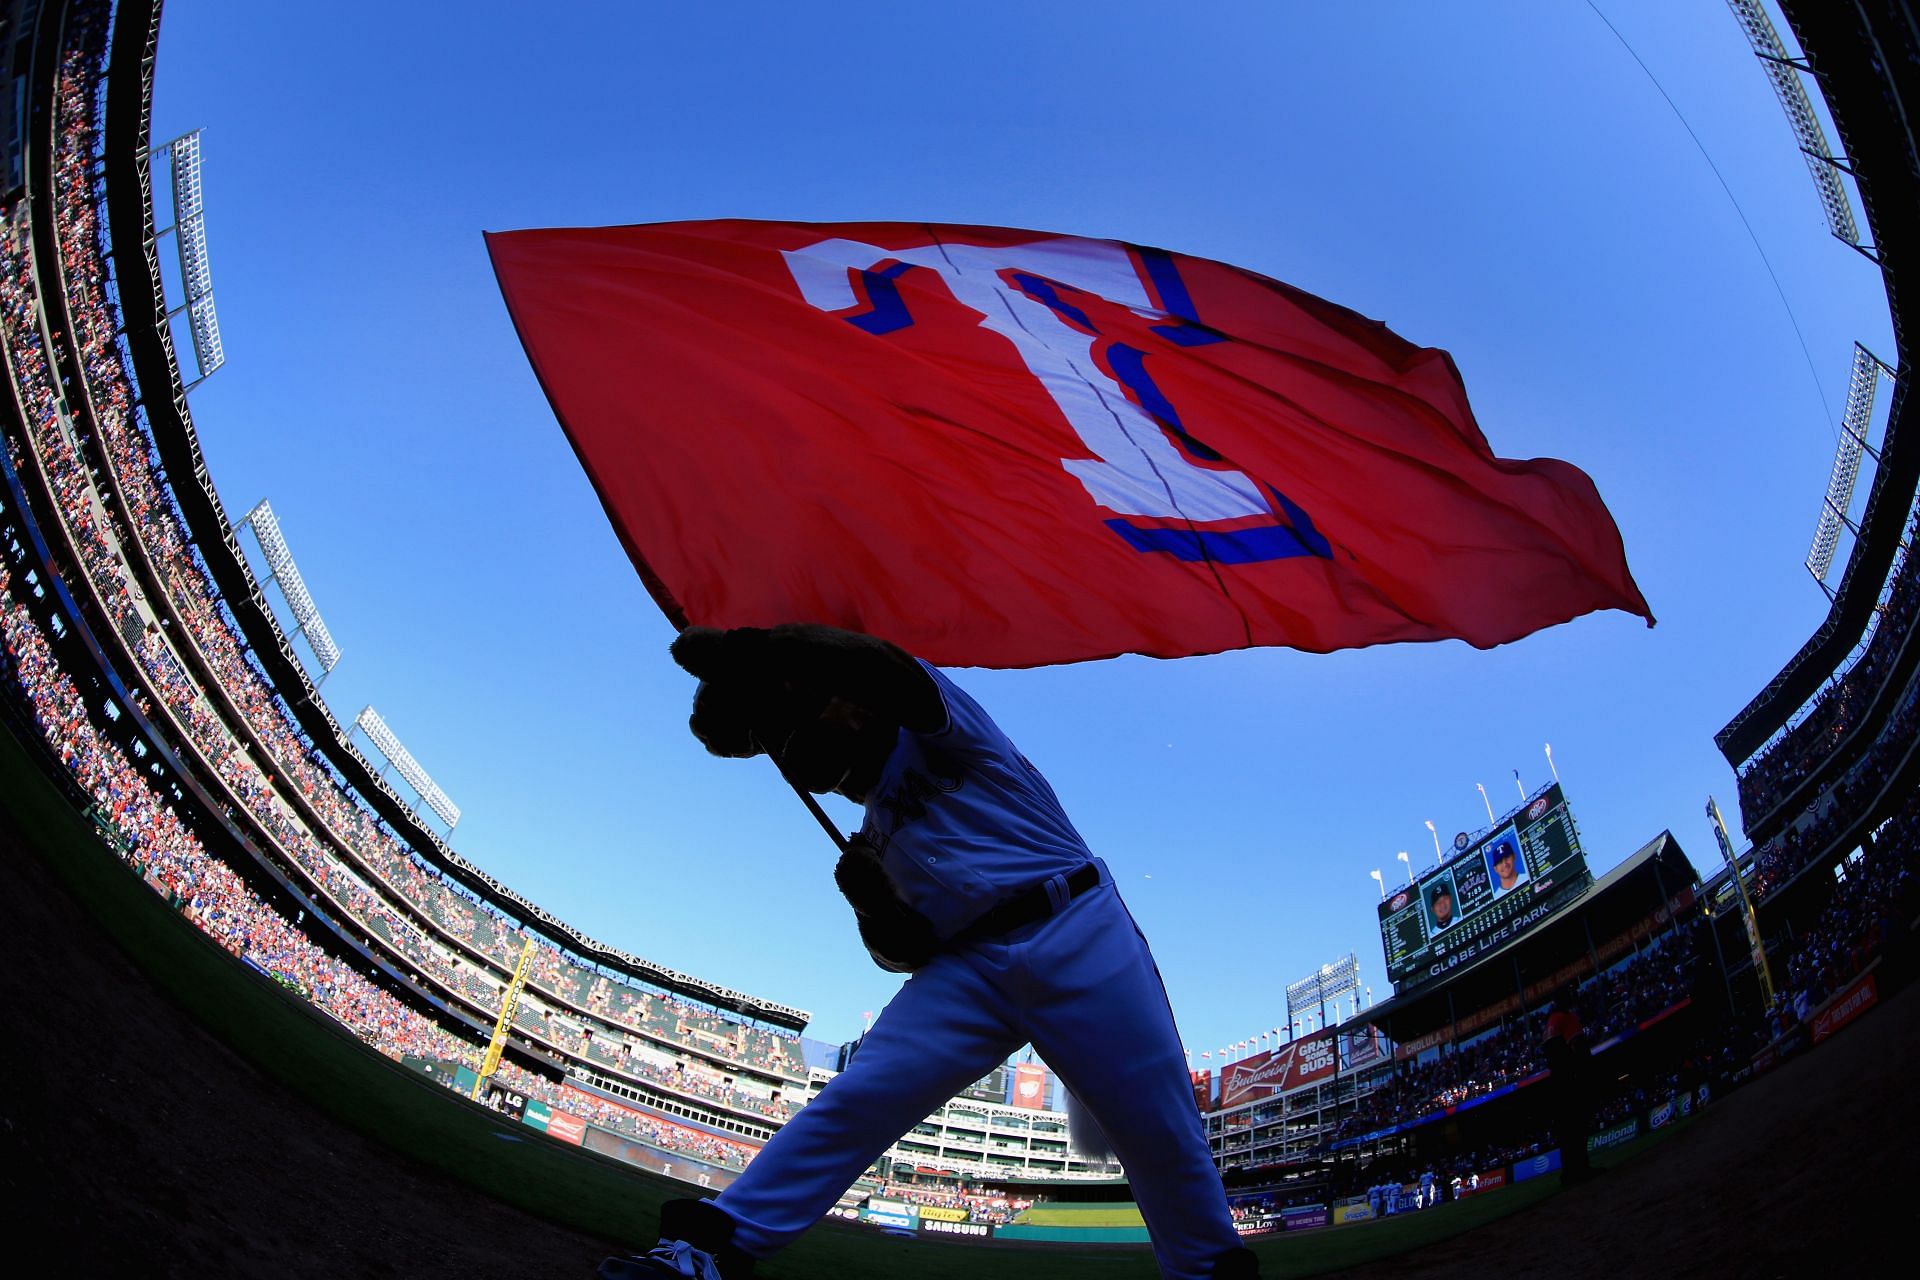 The Rangers are a beloved Texas team